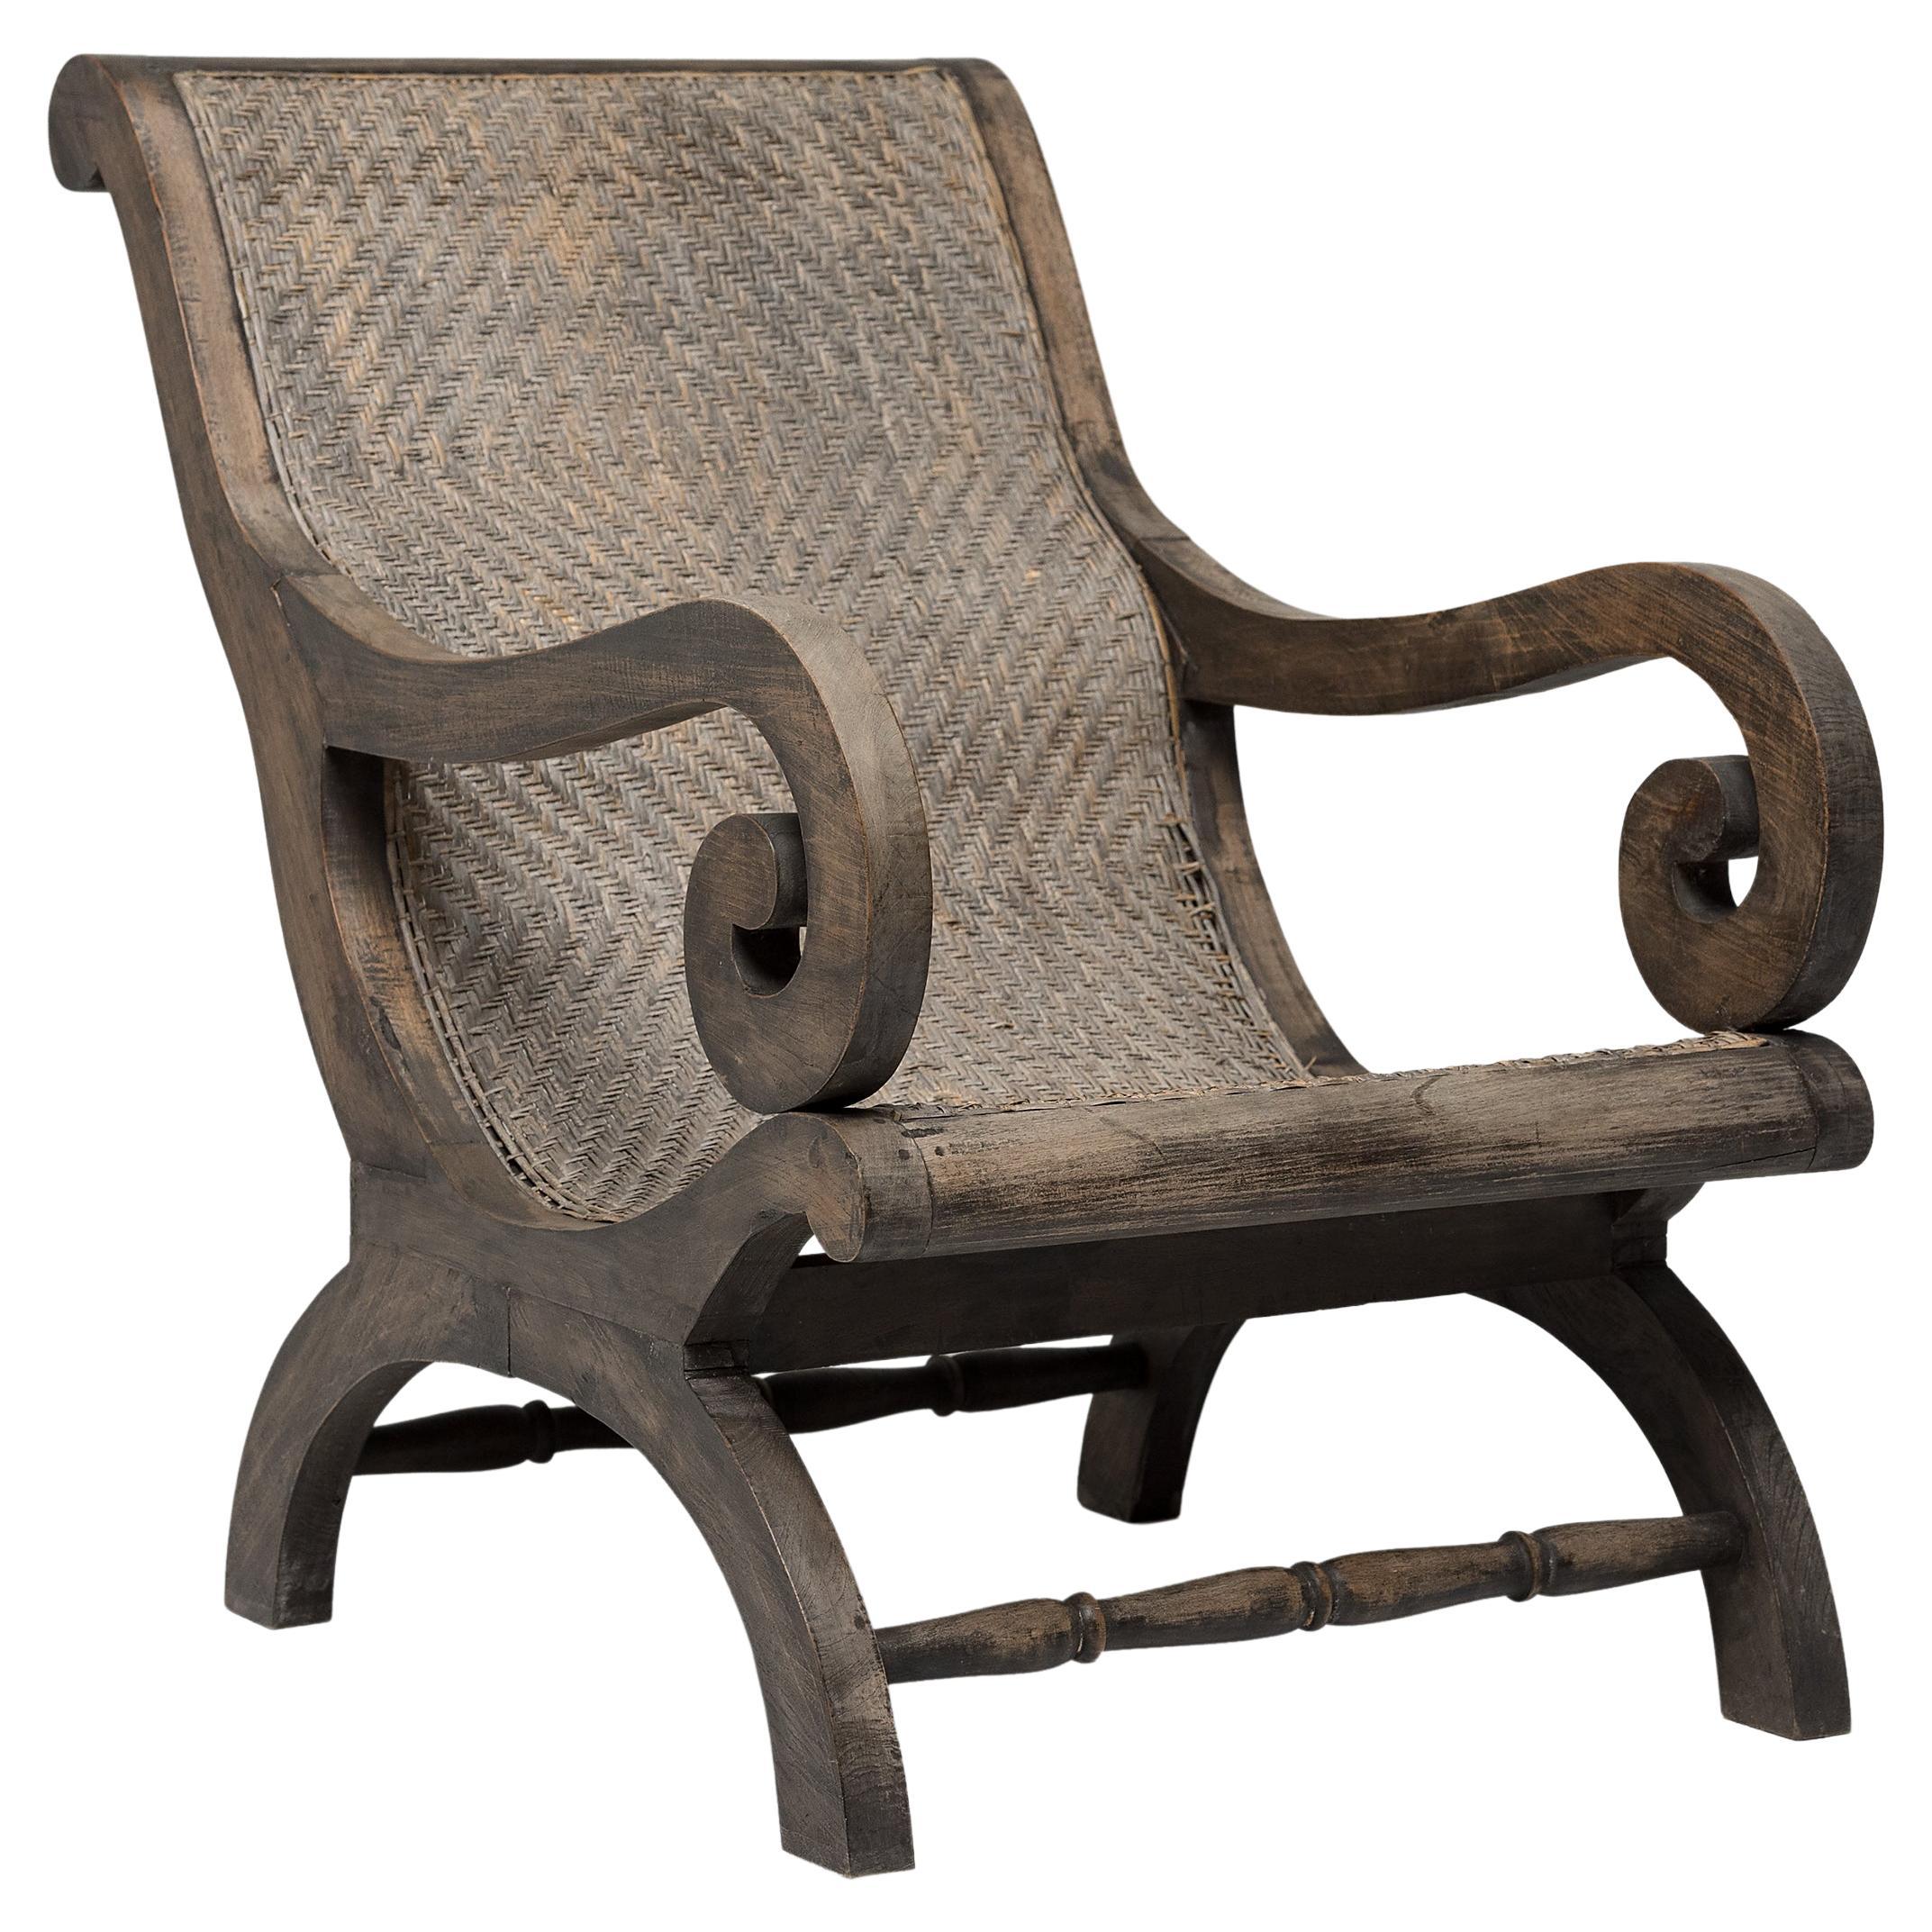 Woven Rattan Colonial Reclining Chair, c. 1900 For Sale